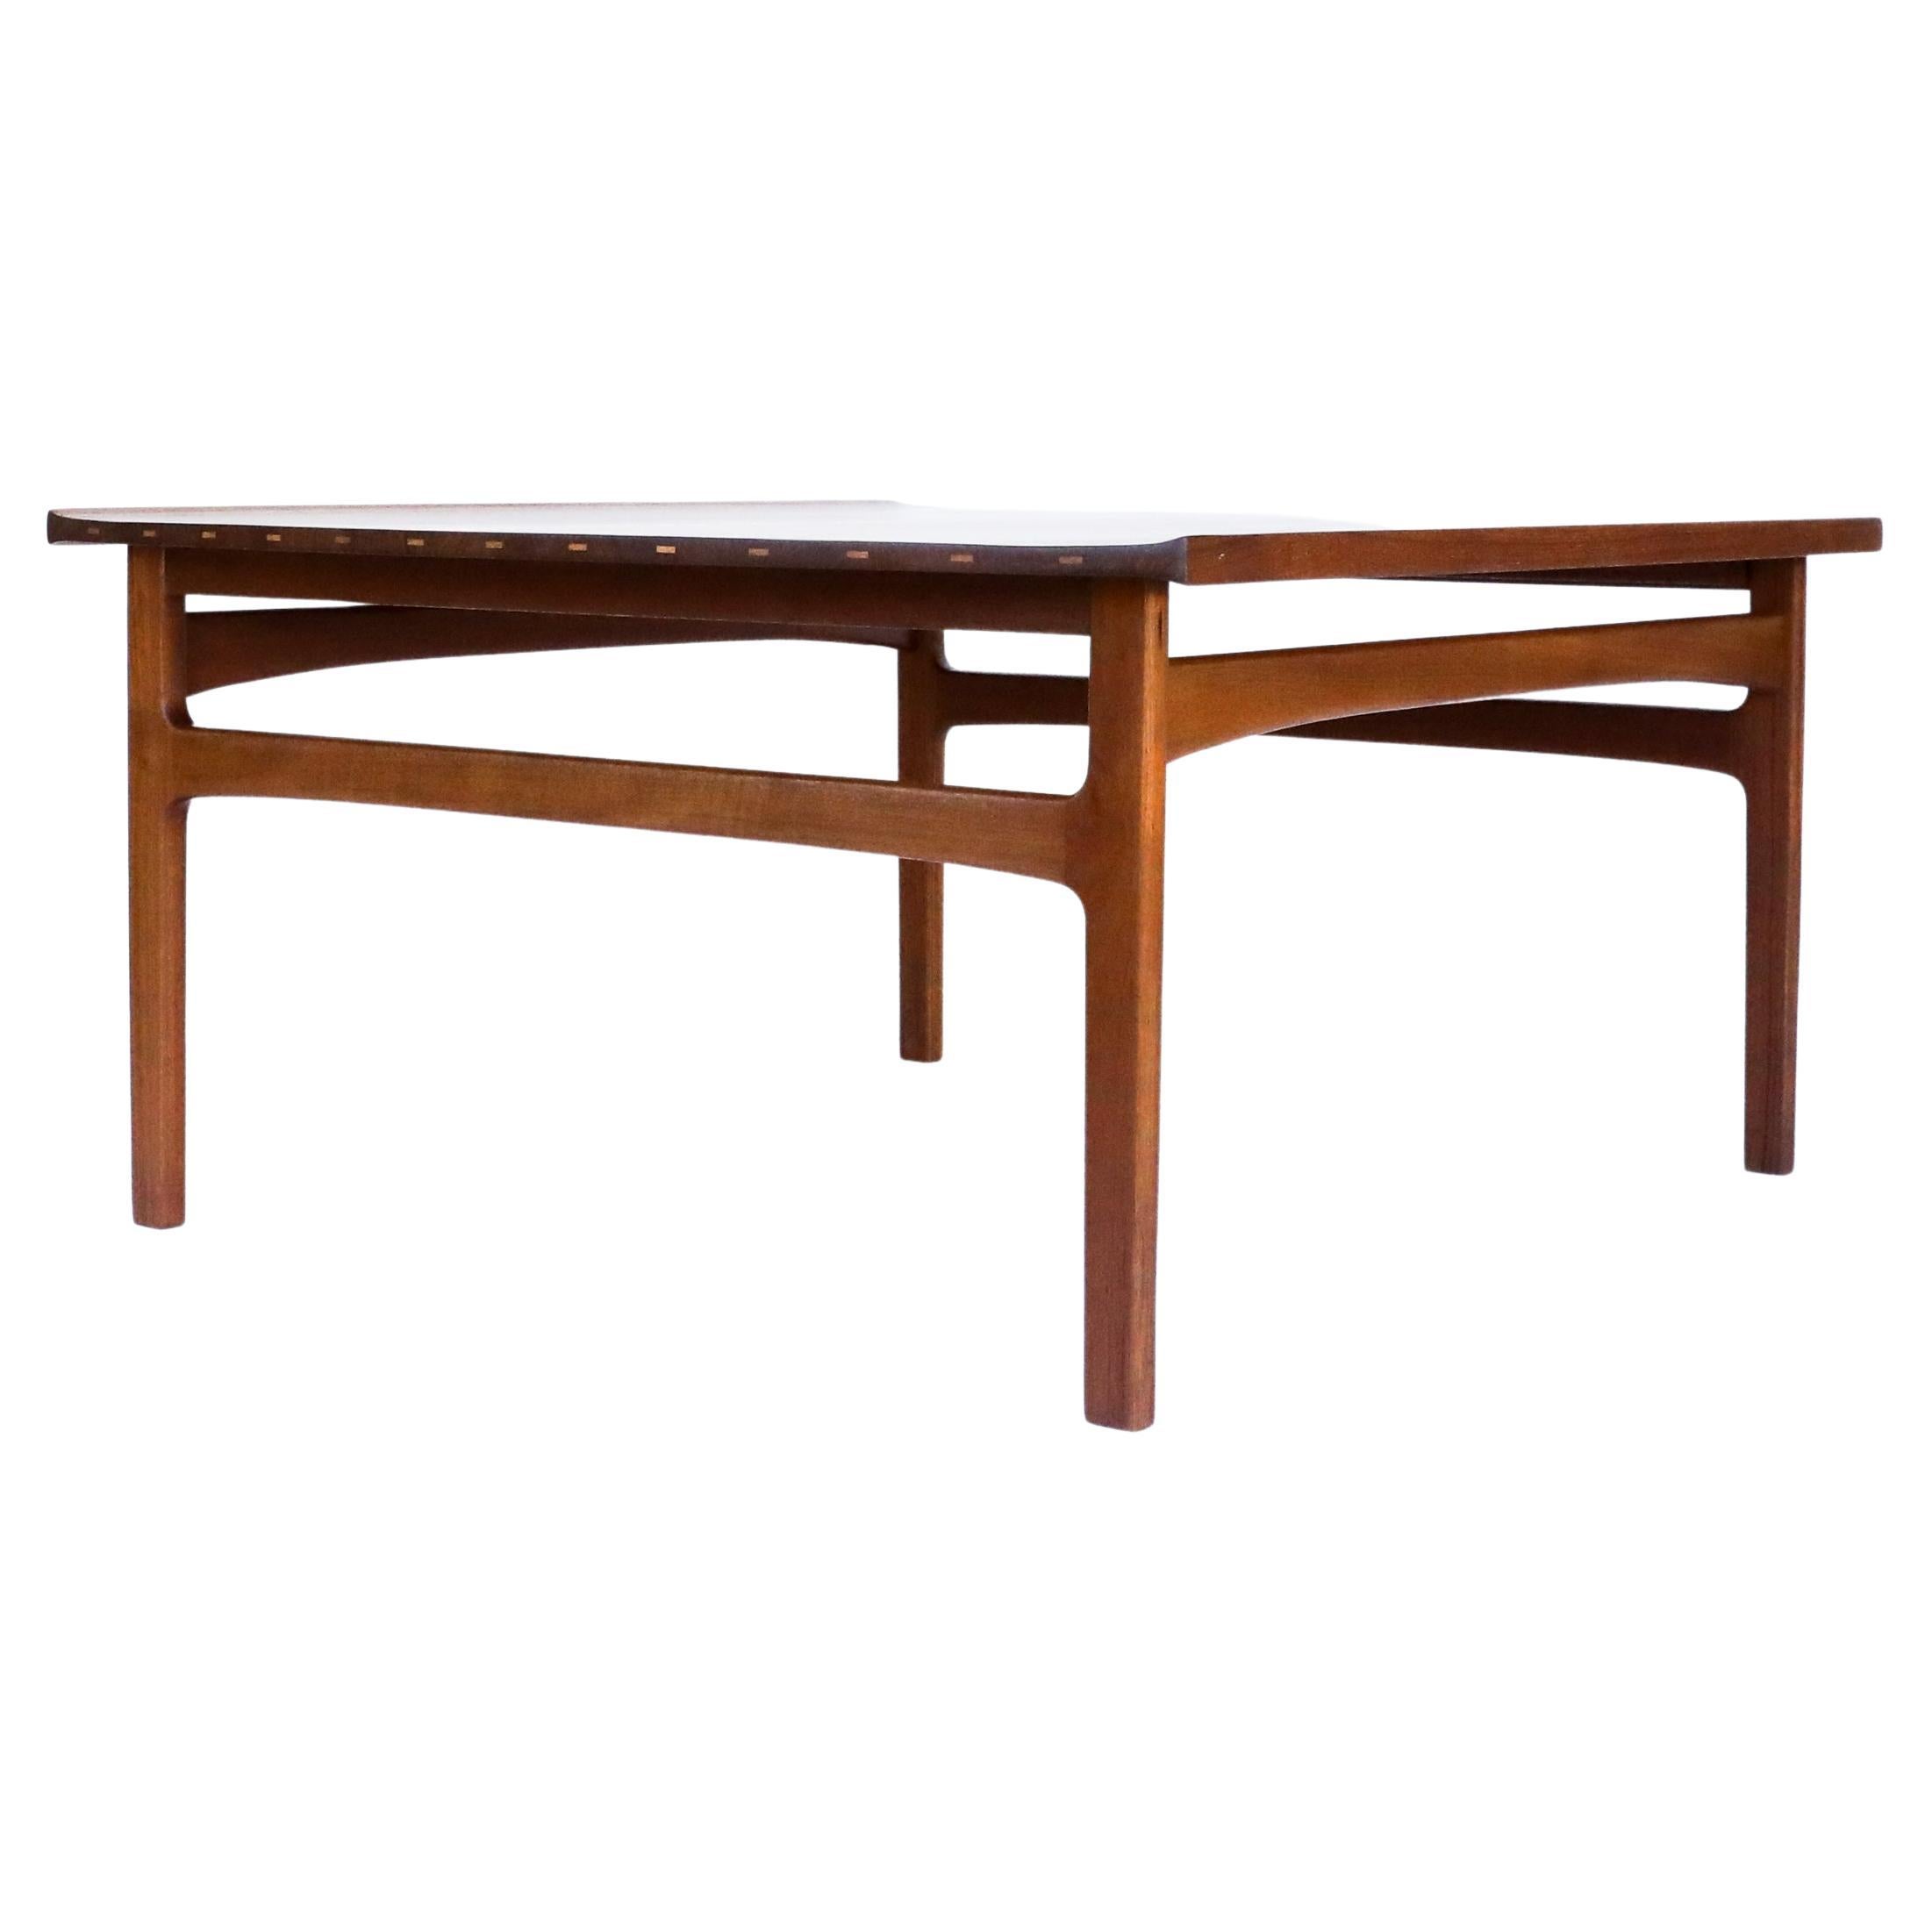 This is a stunning solid teak Danish coffee table which features a sculptural lipped edge top with two elegantly curved sides. The exposed wood joinery on the curved edges features distinctive inlays in a lighter, contrasting beech wood. This is an